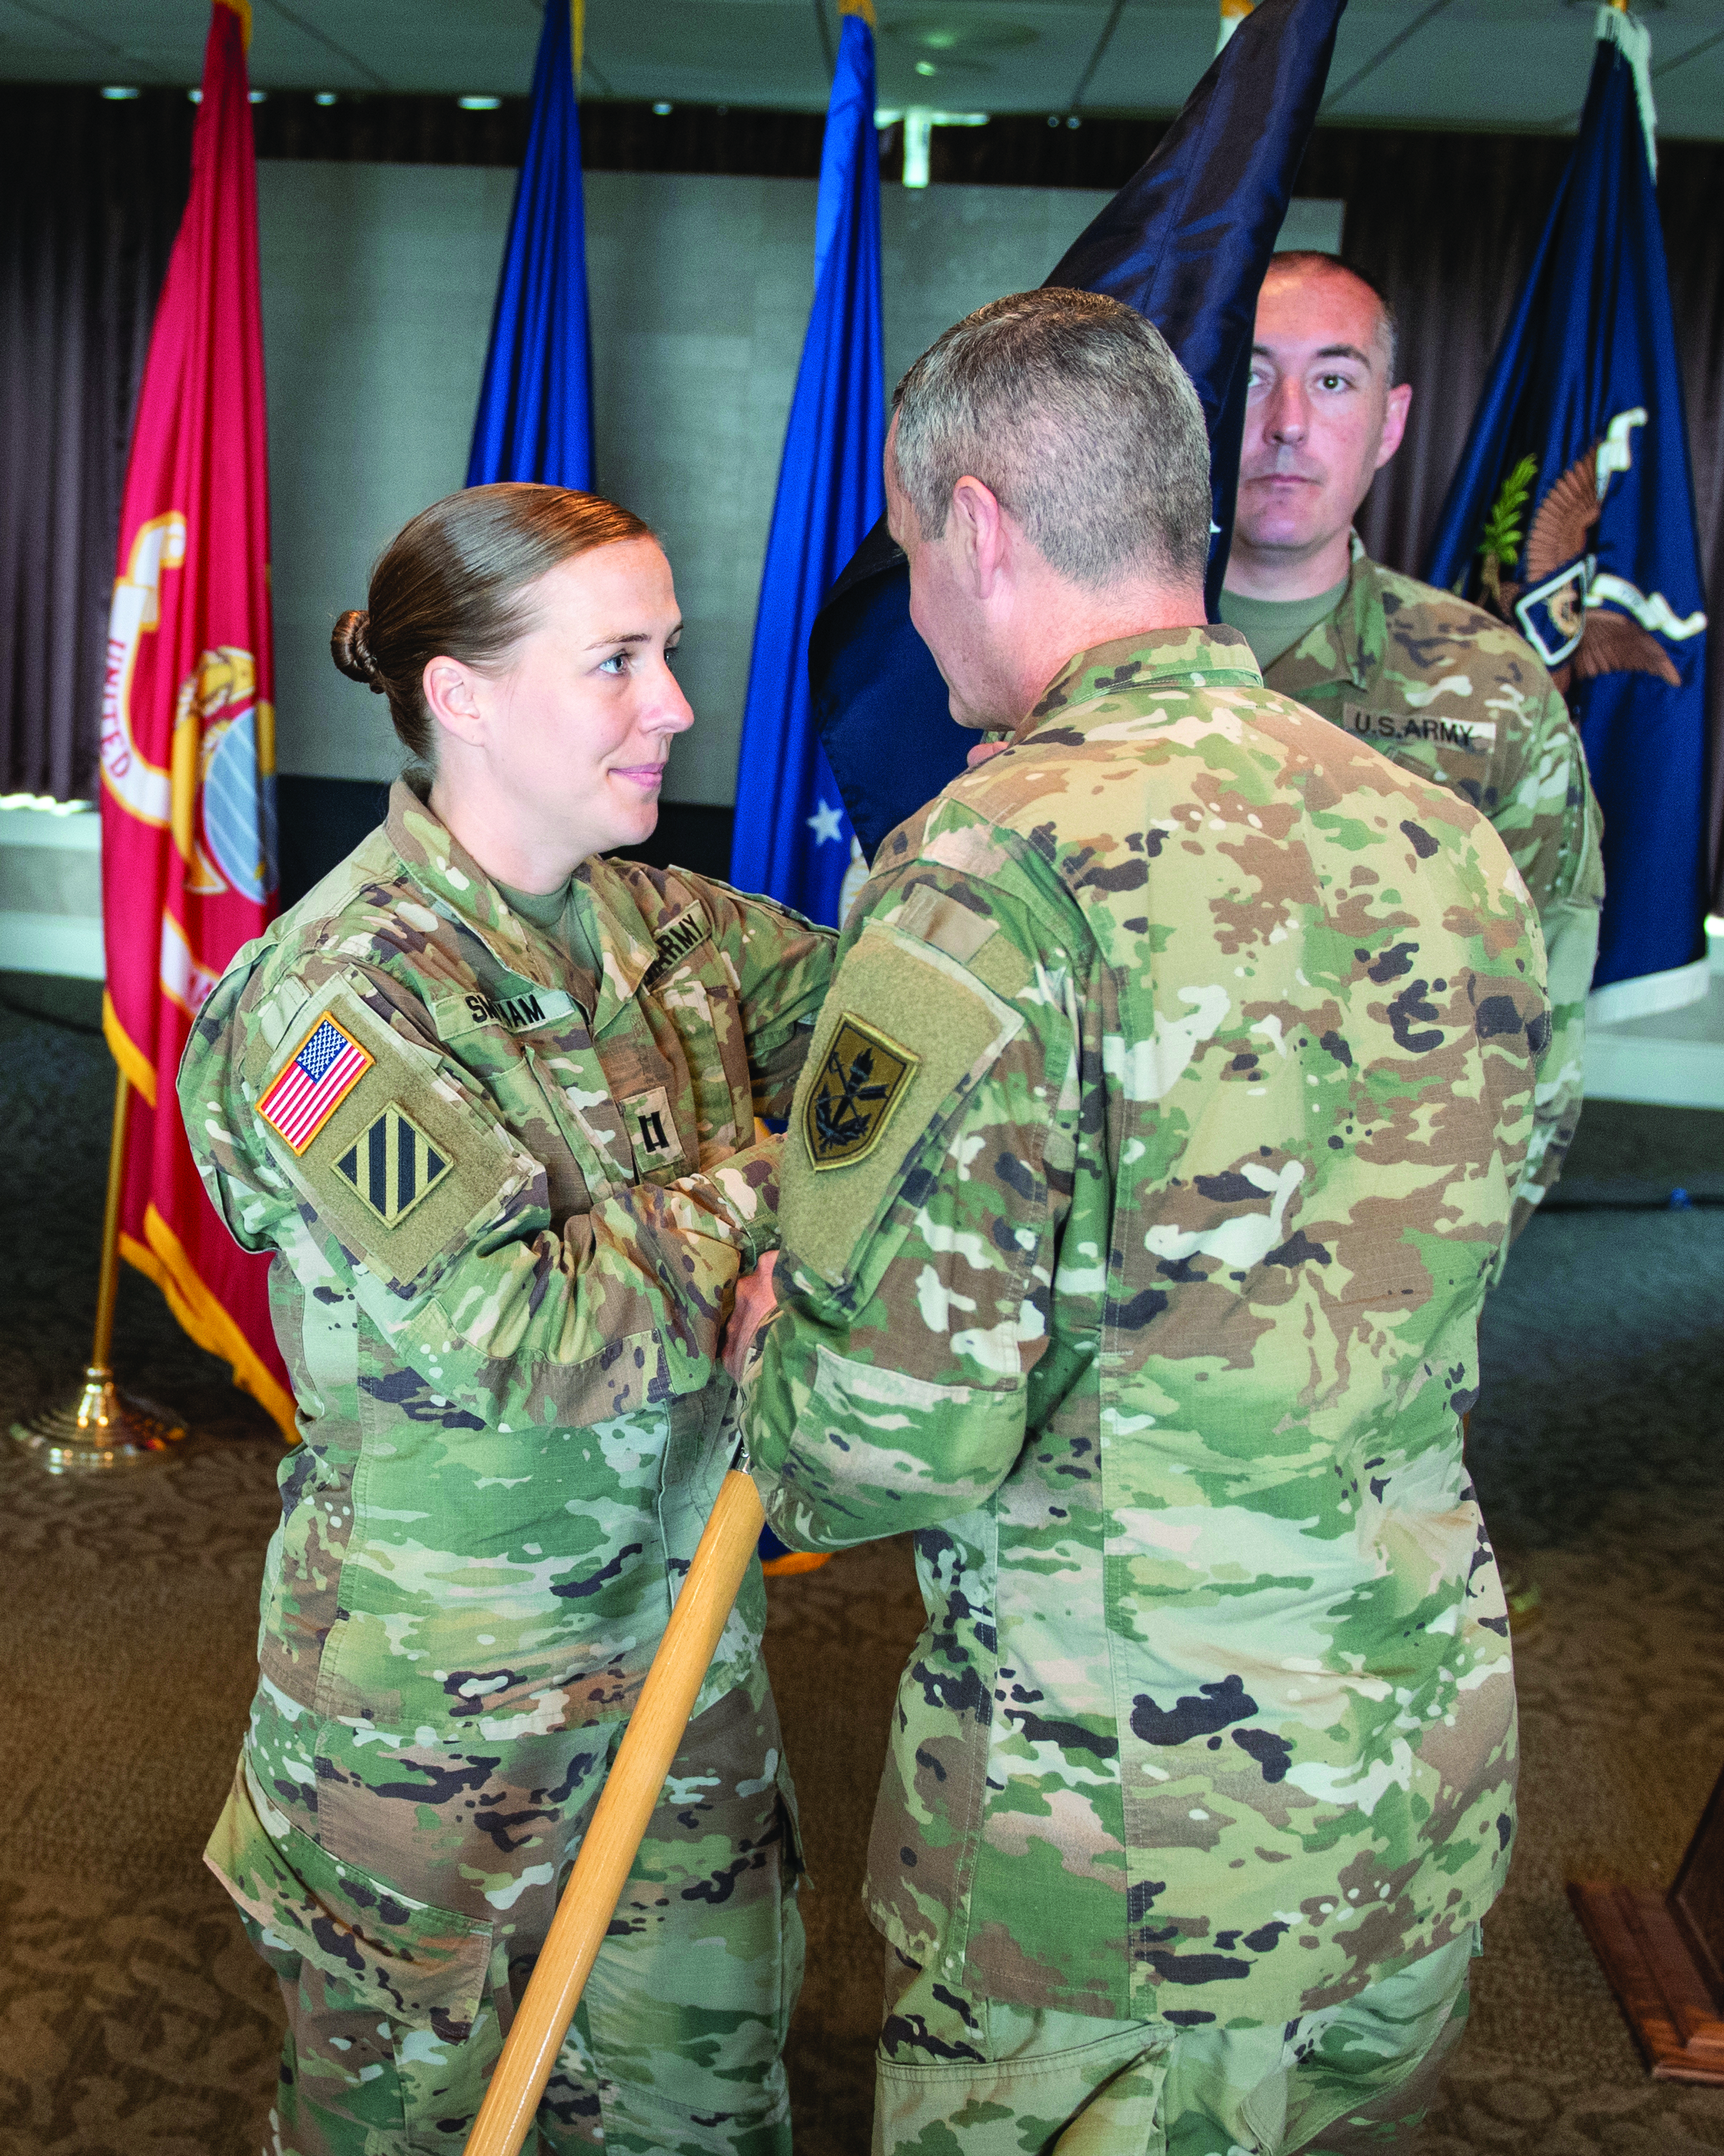 CPT Grace Smitham takes command of the Judge
        Advocate Officer Basic Course Student Detachment
        in July 2019 at The Judge Advocate General’s Legal
        Center and School in Charlottesville, Virginia. (Credit:
        Jason Wilkerson, TJAGLCS)